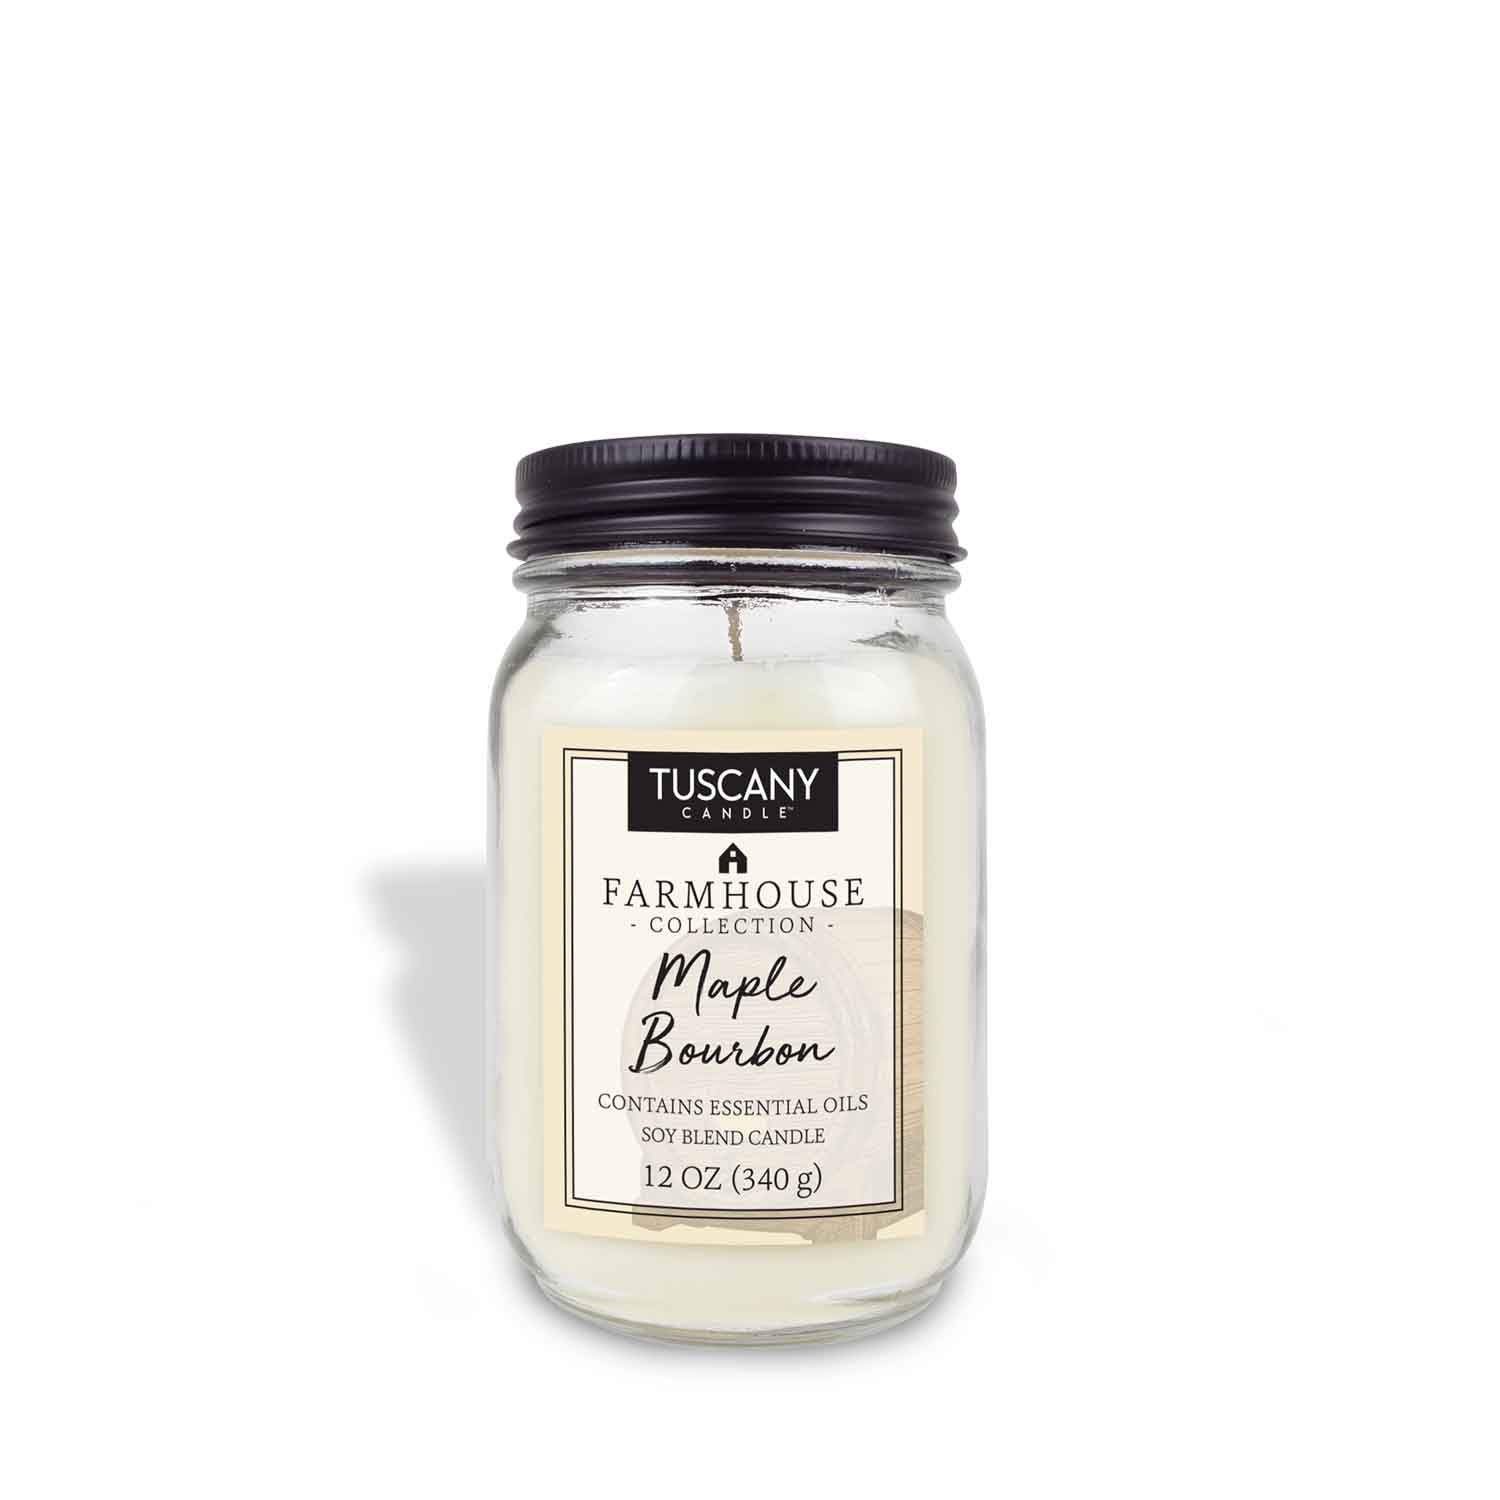 A Maple Bourbon Scented Jar Candle (12 oz) – Farmhouse Collection from Tuscany Candle® EVD on a white background.